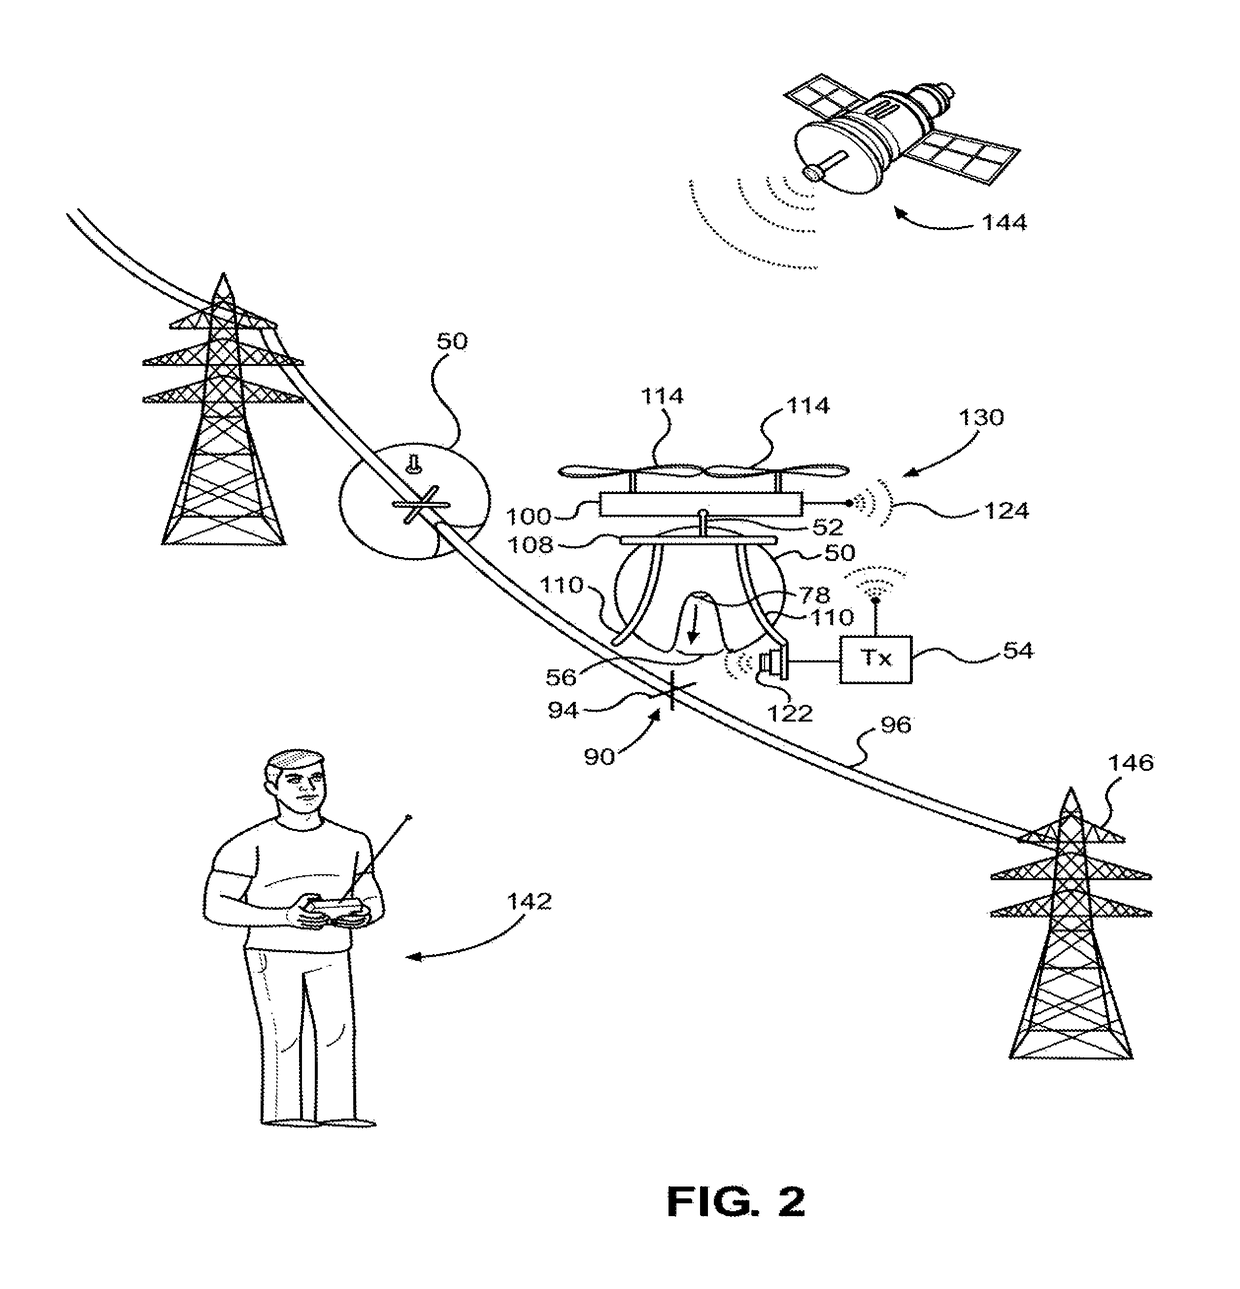 Method for installing an object using an unmanned aerial vehicle